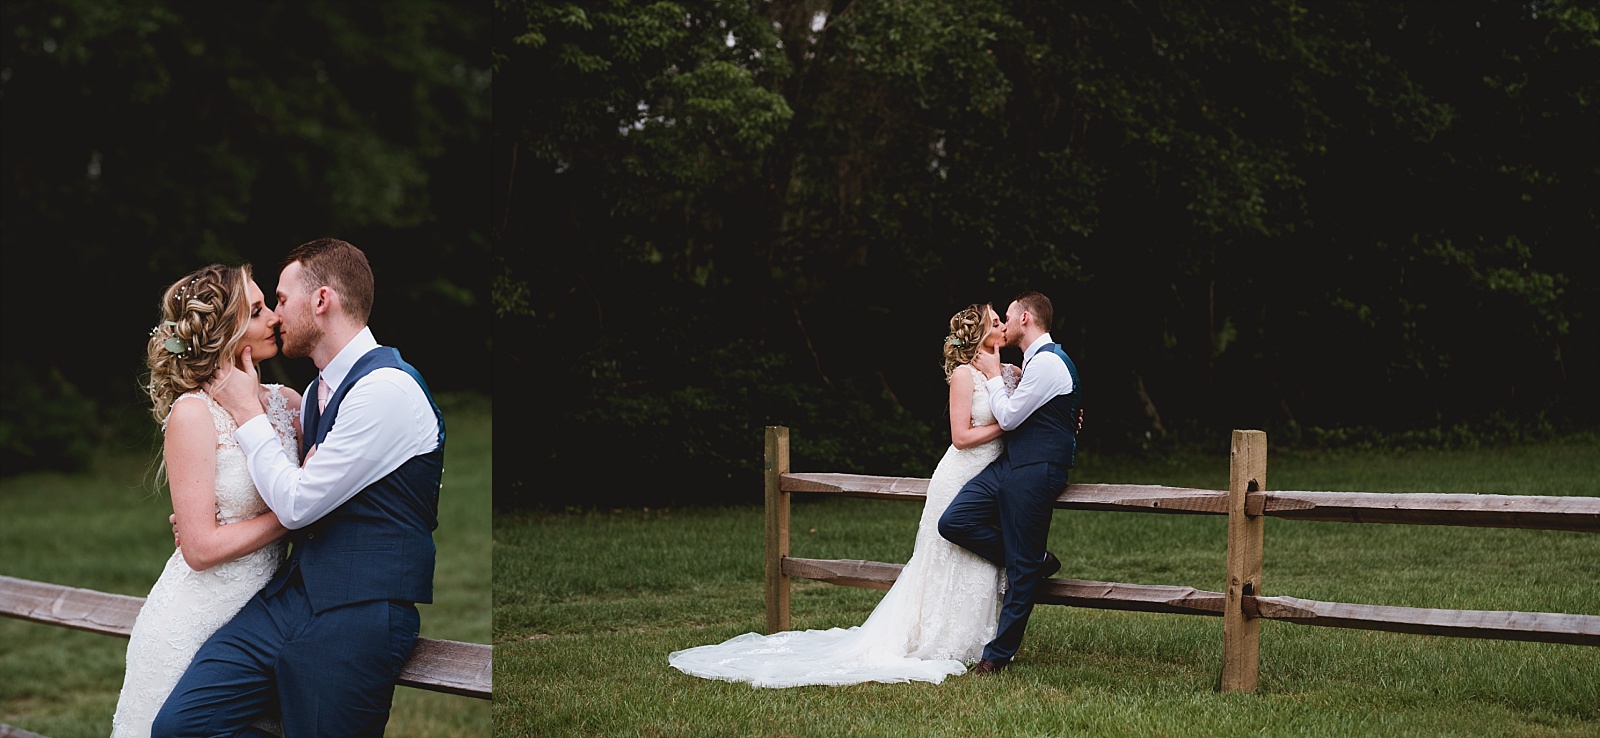 Intimate bride and groom portraits in Gainesville, Florida.